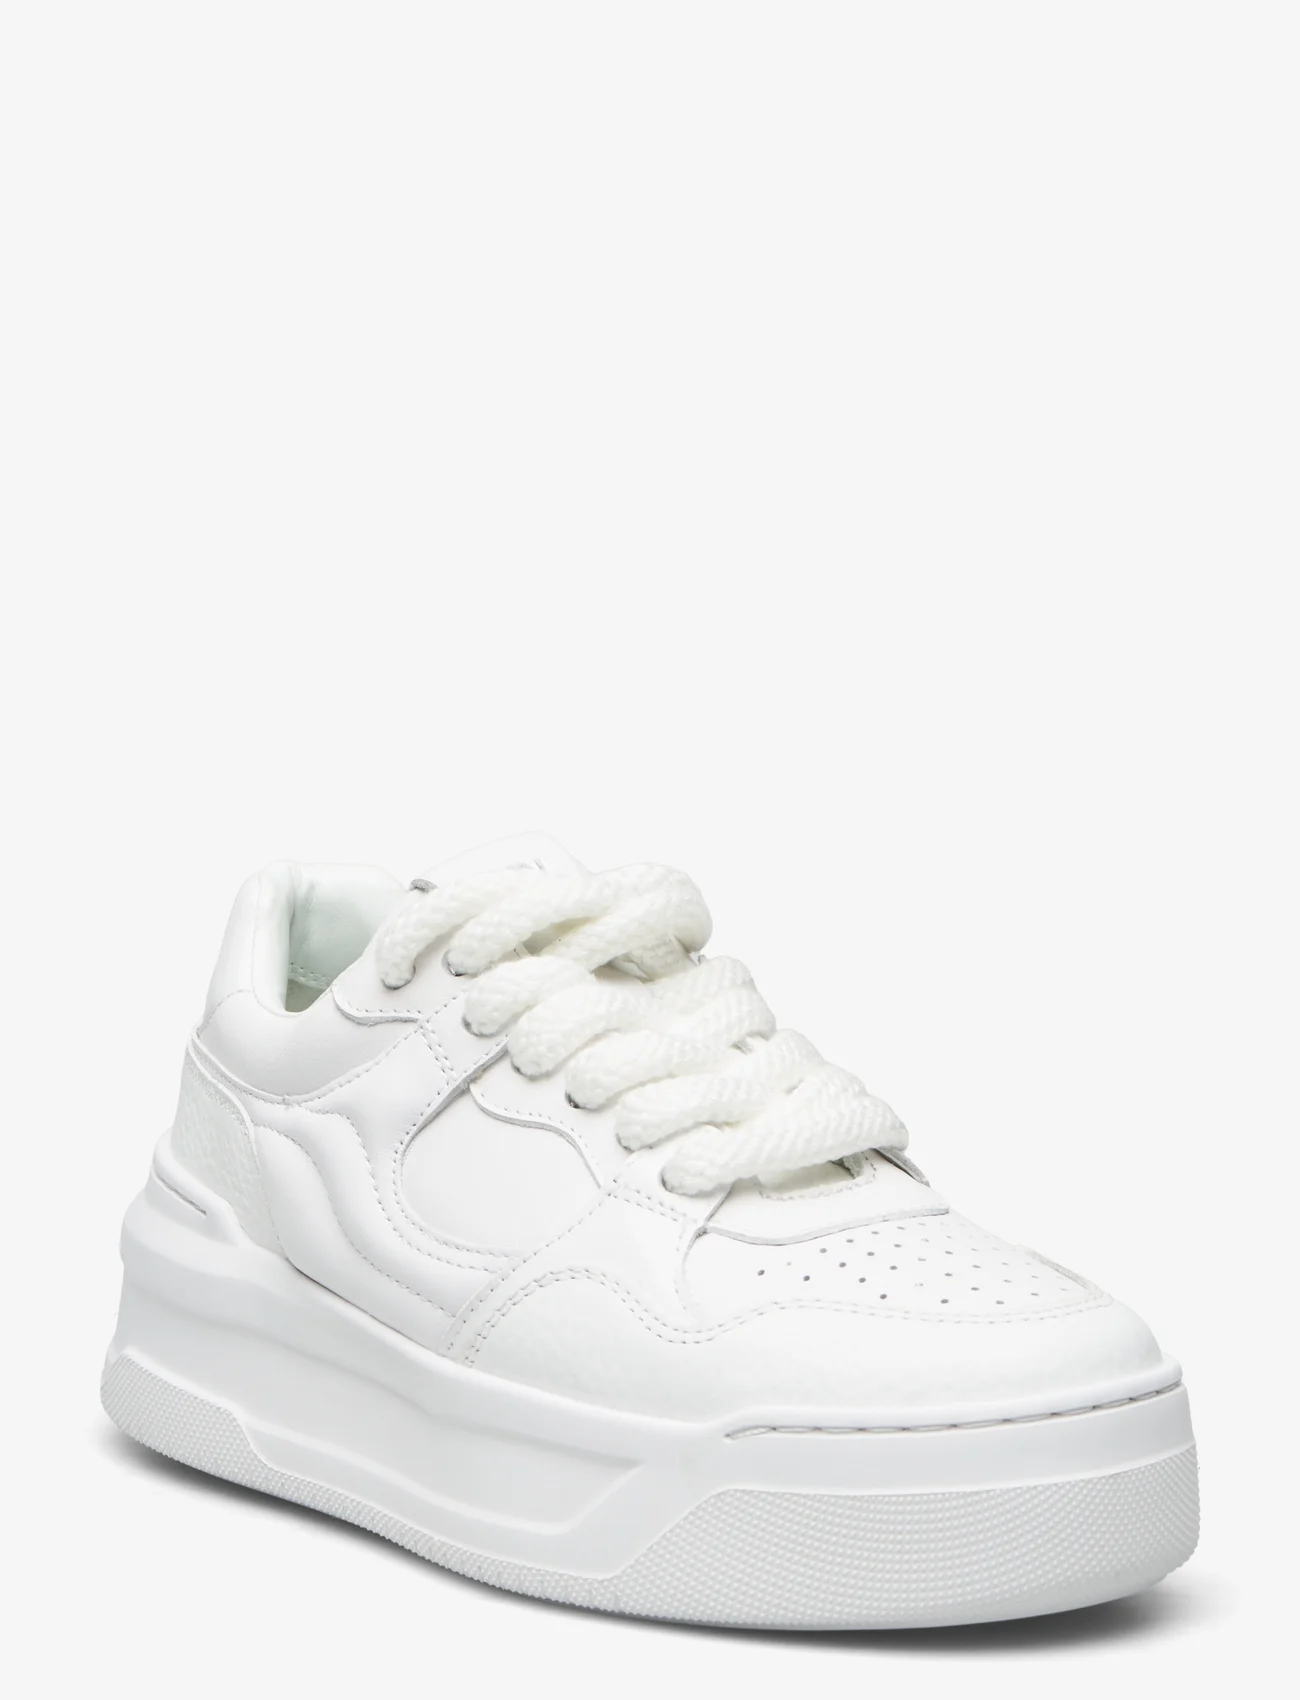 Karl Lagerfeld Shoes - KREW MAX KC - low top sneakers - white lthr - 0